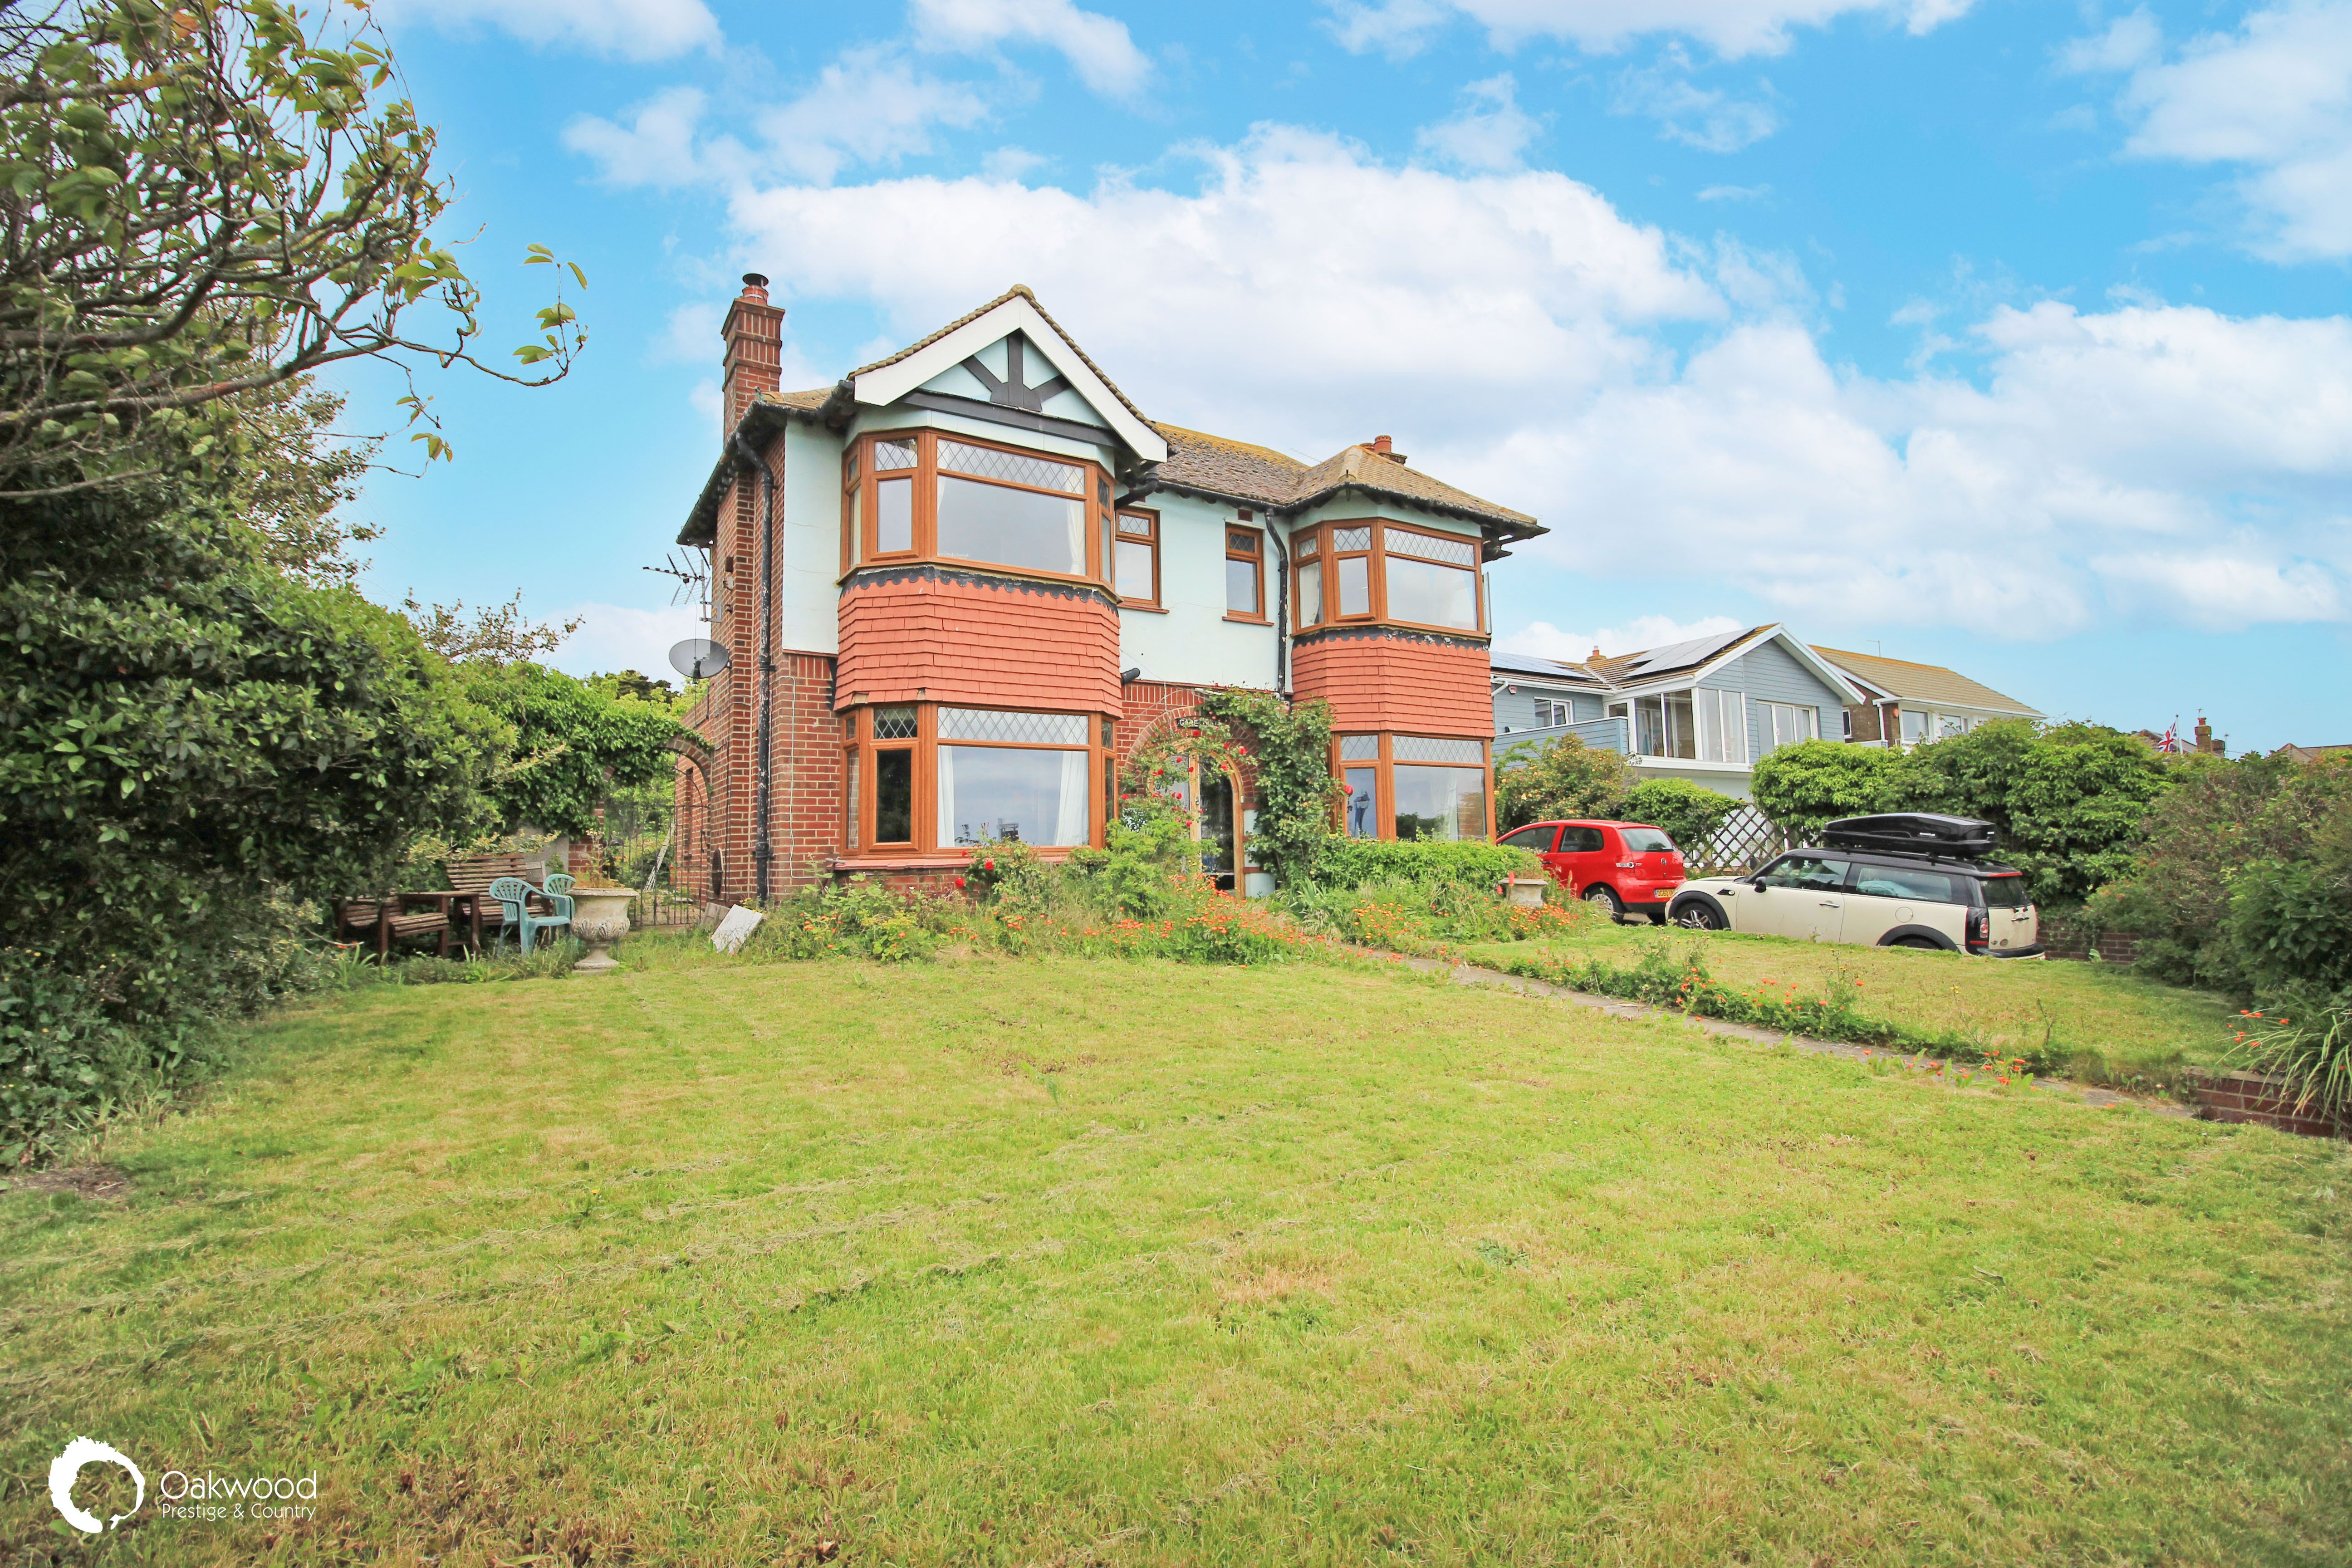 3 bed detached house for sale in Victoria Parade, Ramsgate - Property Image 1